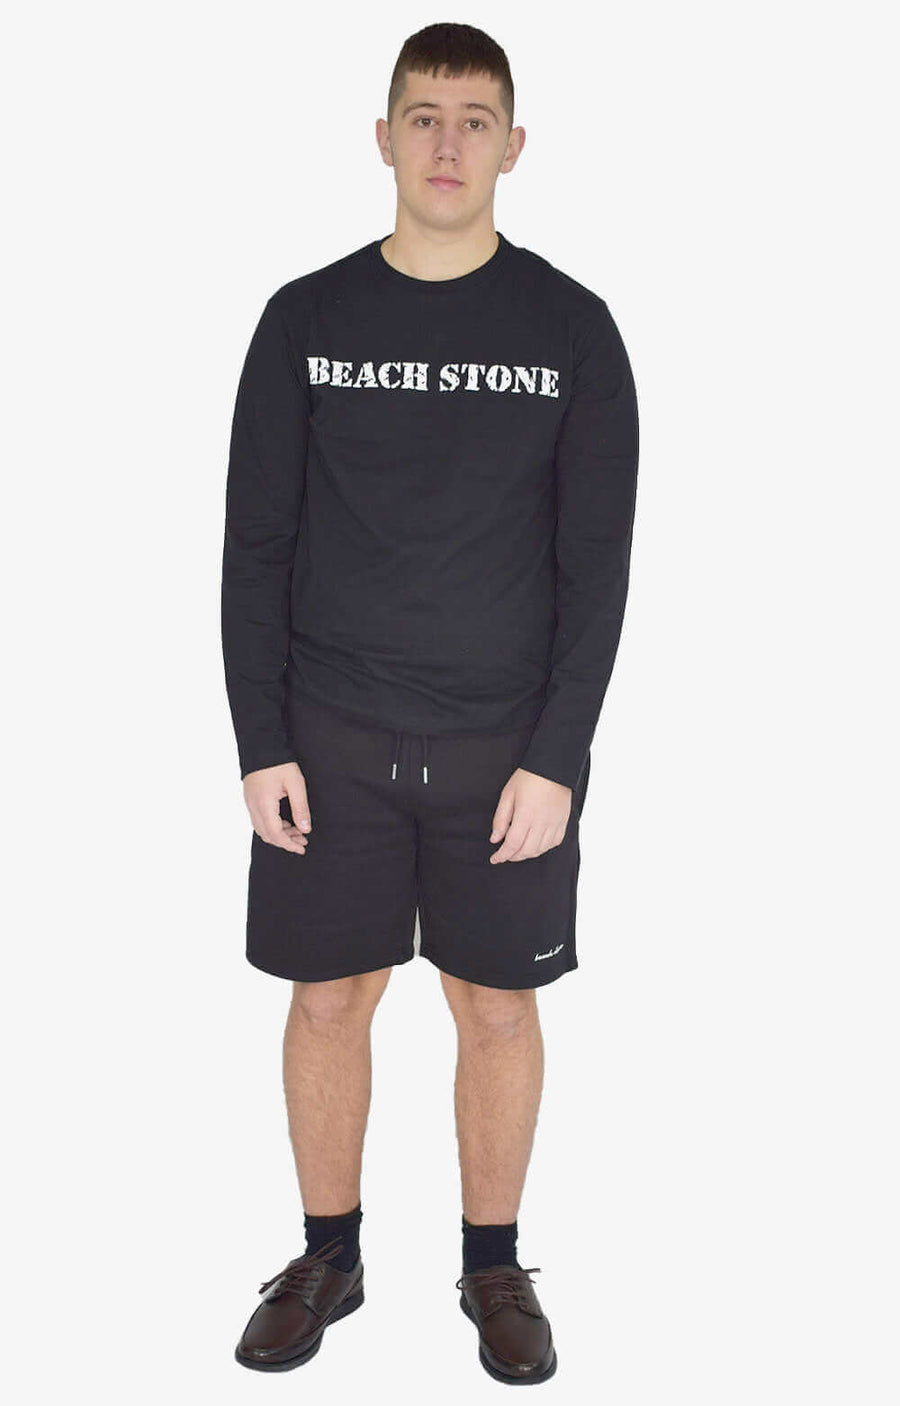 Front View of Regular Men's Gym Shorts in Black for Your Active Lifestyle